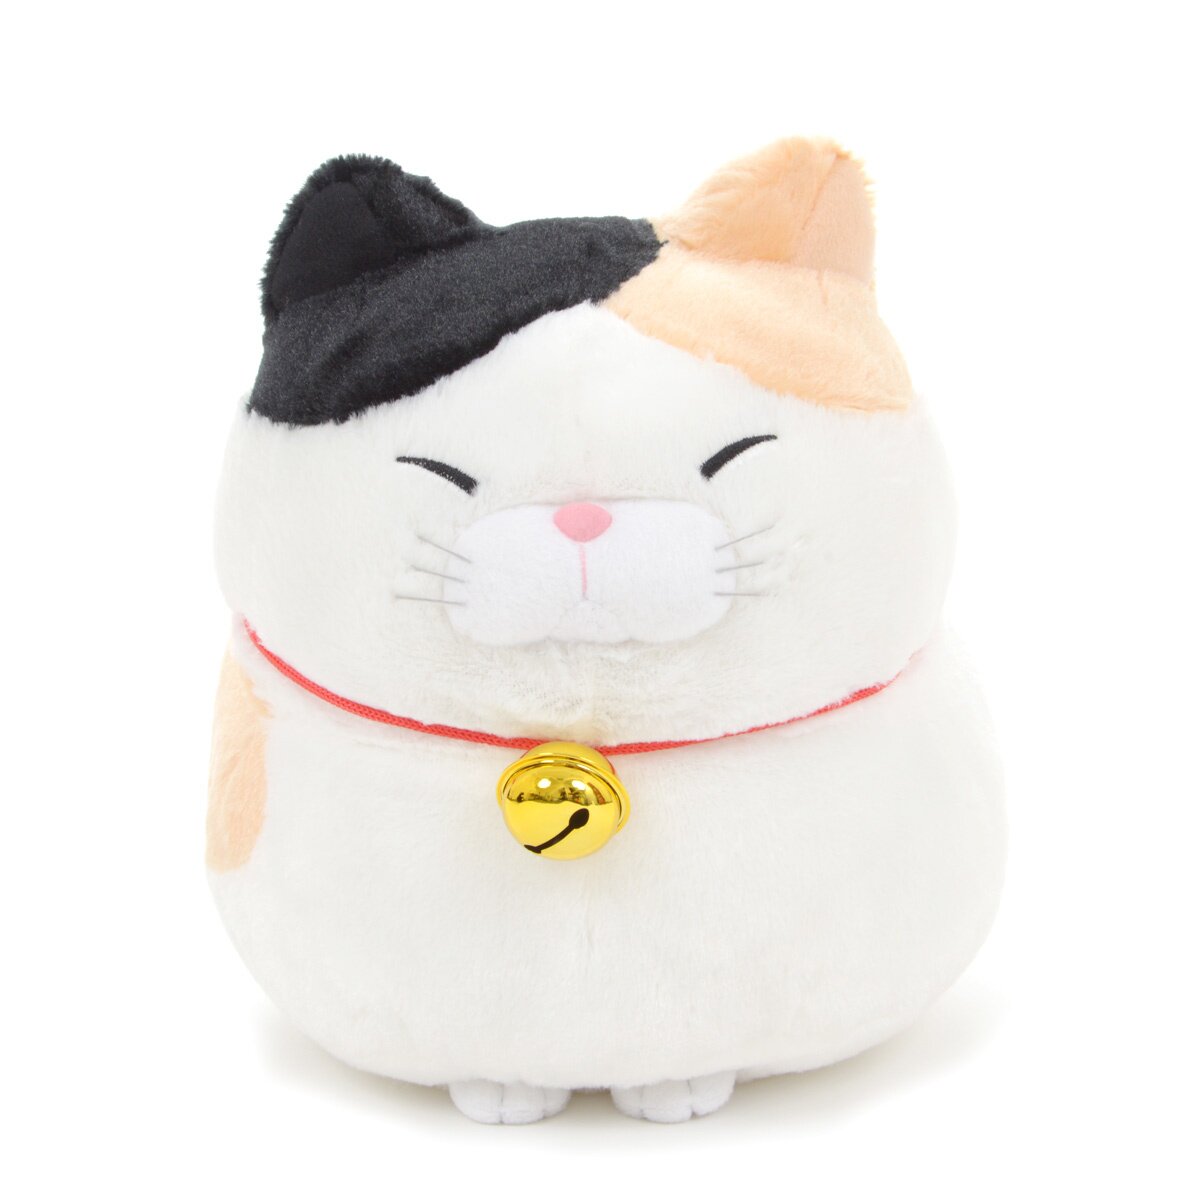 Fuuto Tantei (Fuuto PI) Merch Page 4  Buy from Goods Republic - Online  Store for Official Japanese Merchandise, Featuring Plush